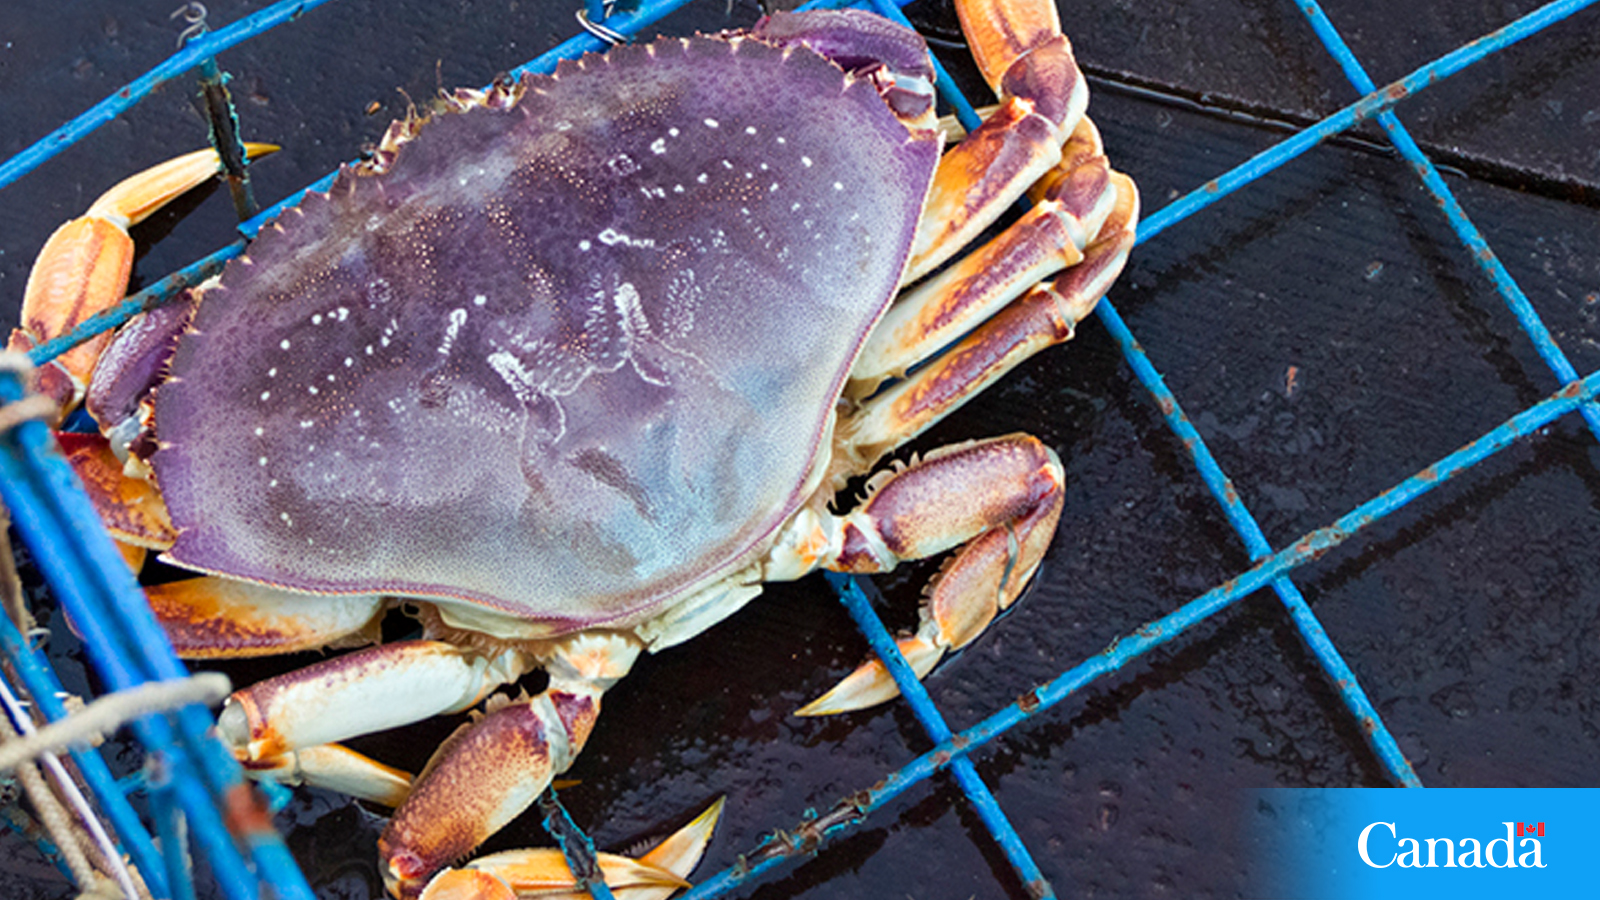 Recreational crab, prawn and other shellfish harvesting in B.C.